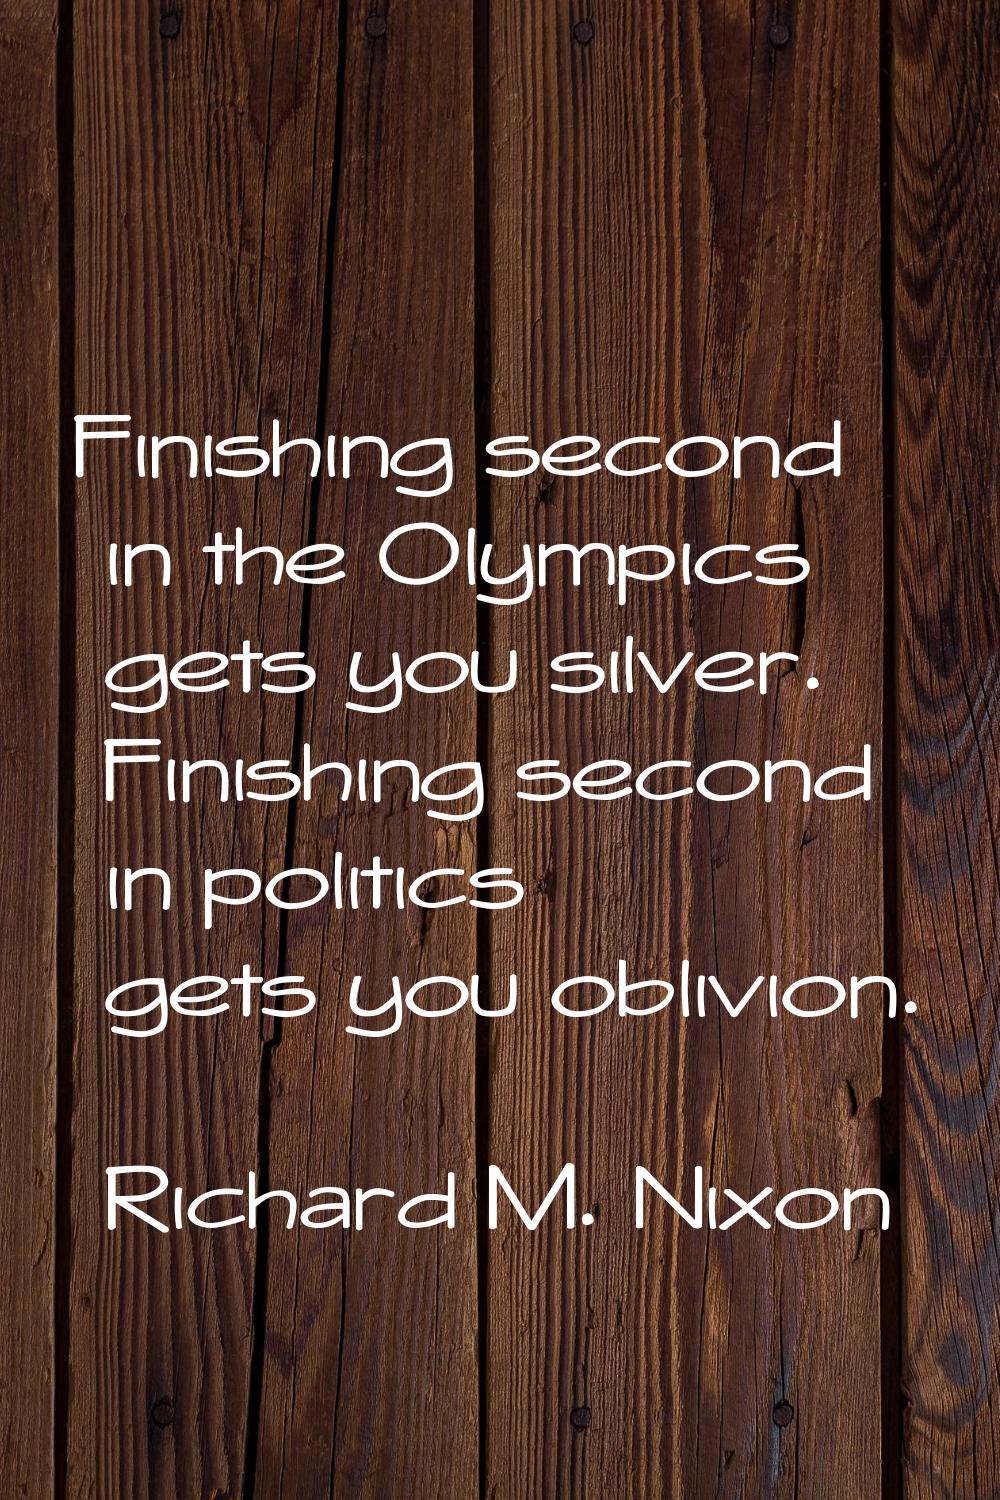 Finishing second in the Olympics gets you silver. Finishing second in politics gets you oblivion.